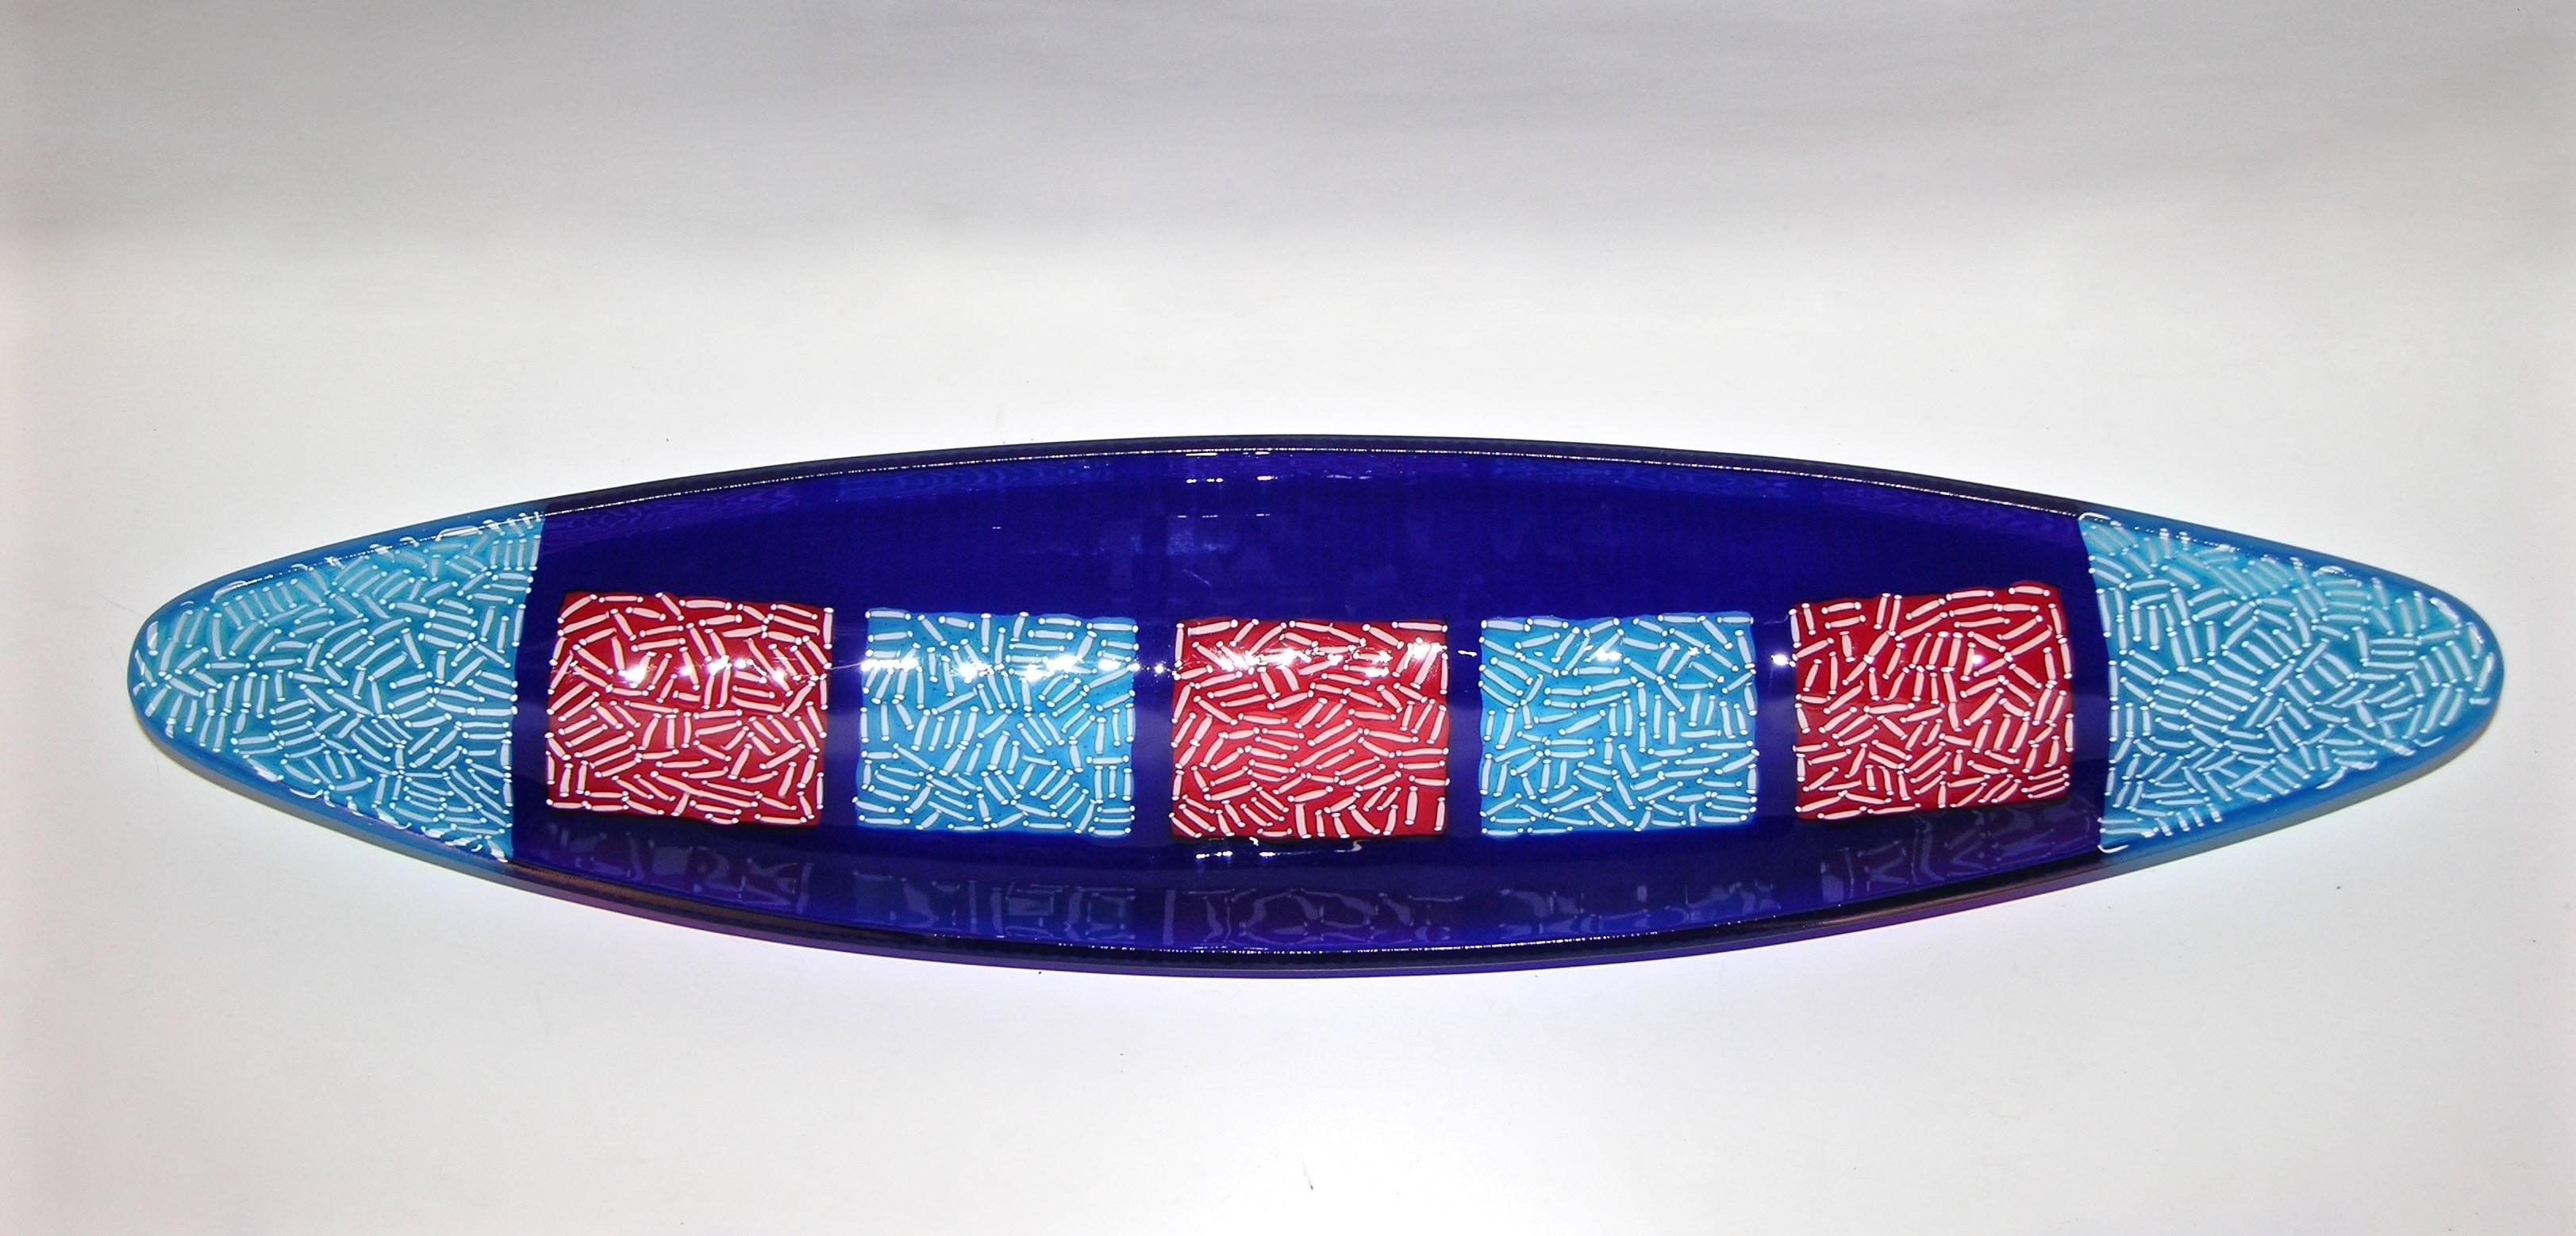 A contemporary bowl of elongated shape like a gondola, in Murano glass, with a decor like a mosaic giving an orientalist flair, created with the highest quality craftsmanship using the fusion technique, exclusive for Cosulich Interiors. The enamel